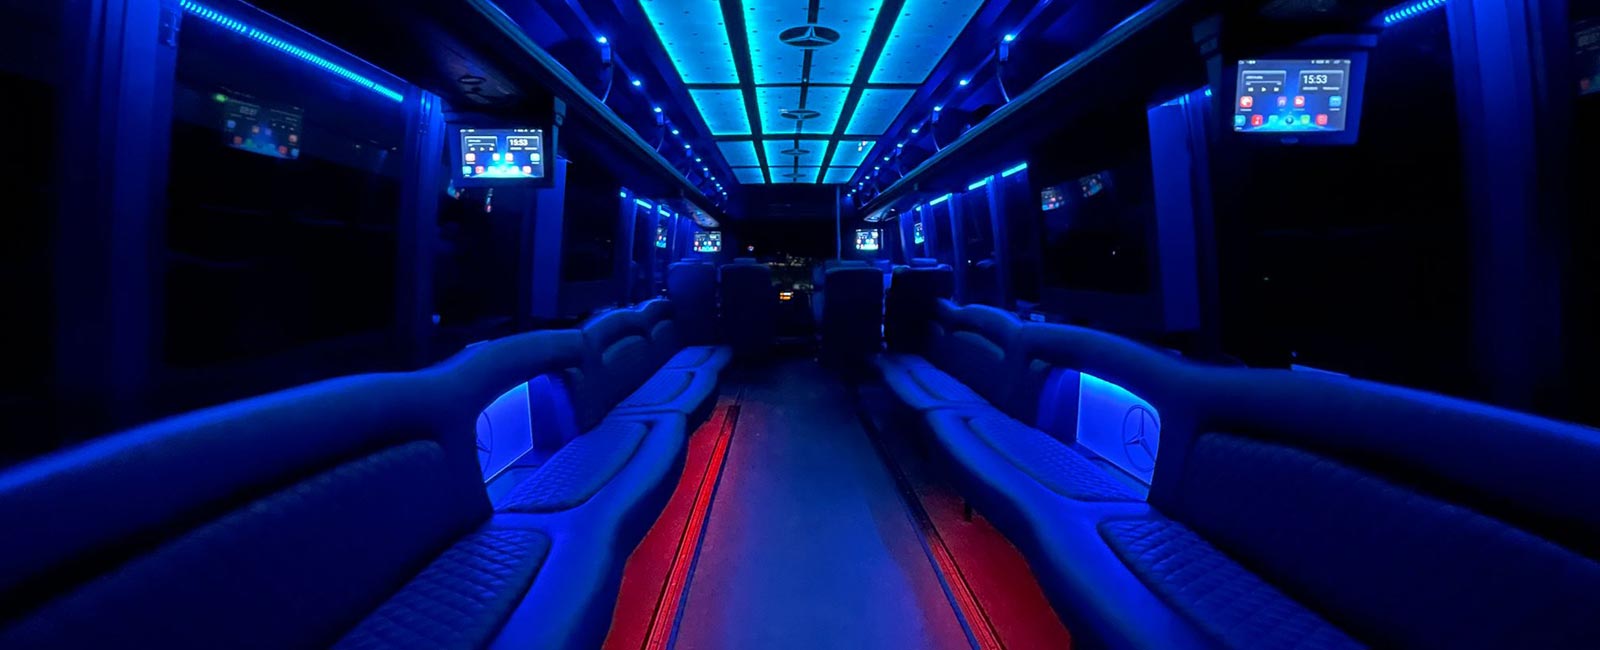 40 Person Limo Bus LED Lights